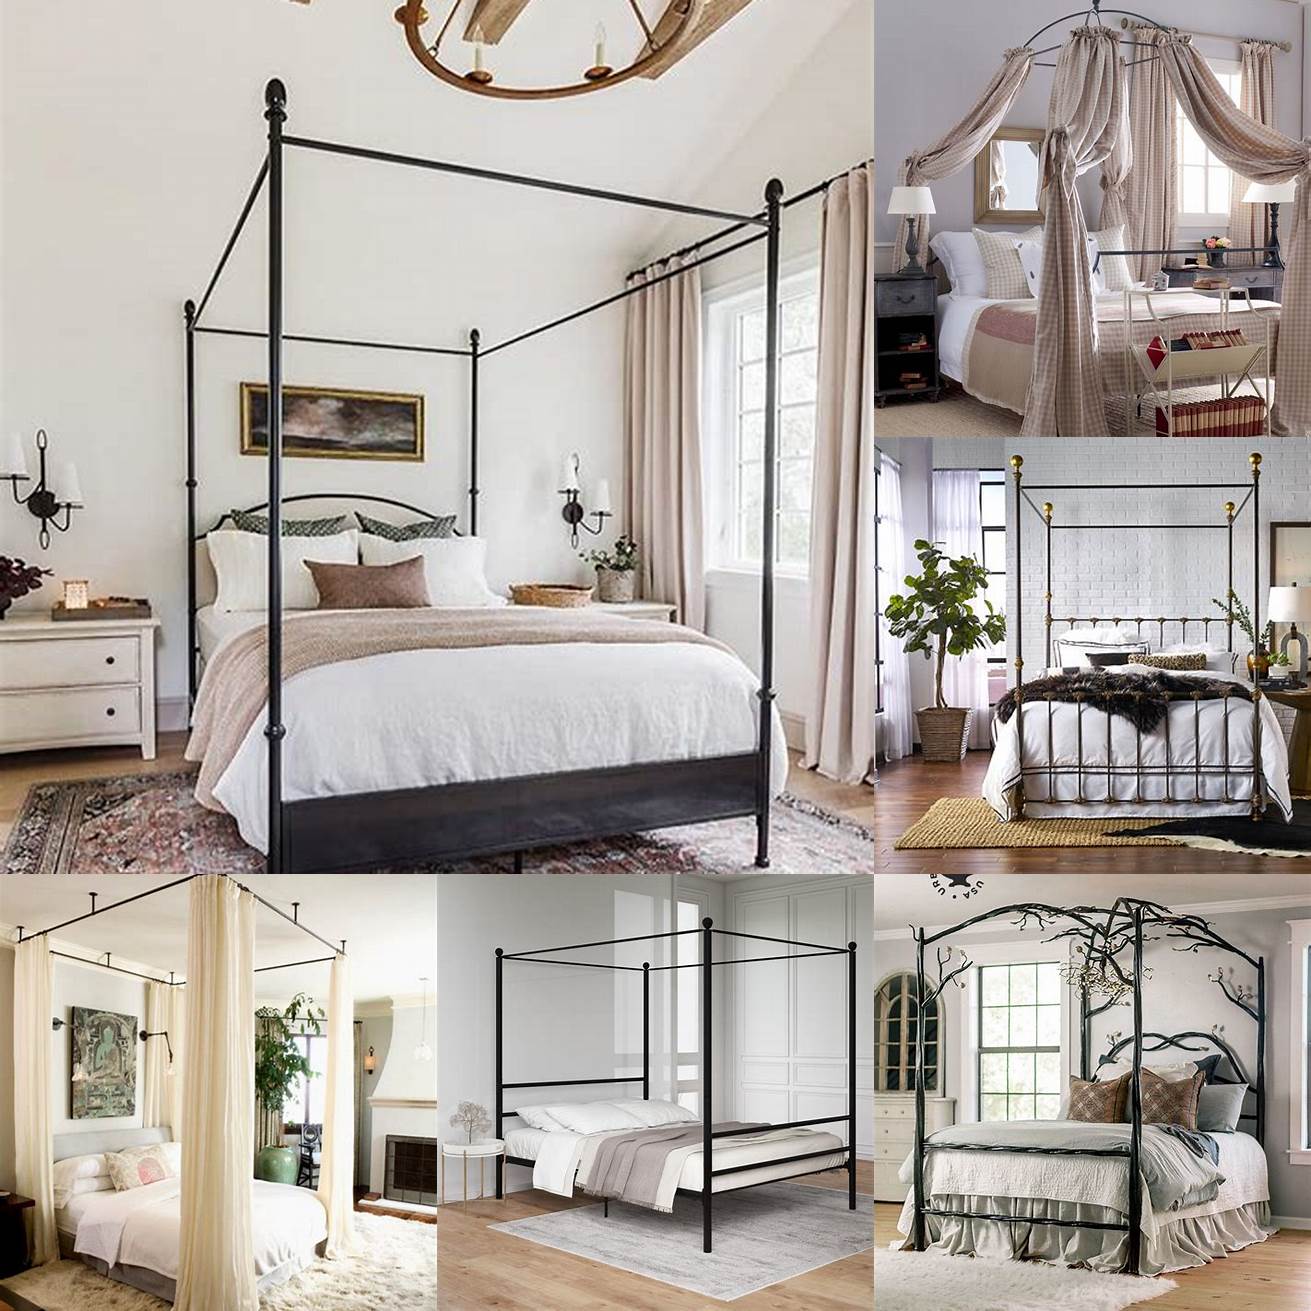 Minimalist metal canopy bed with neutral bedding